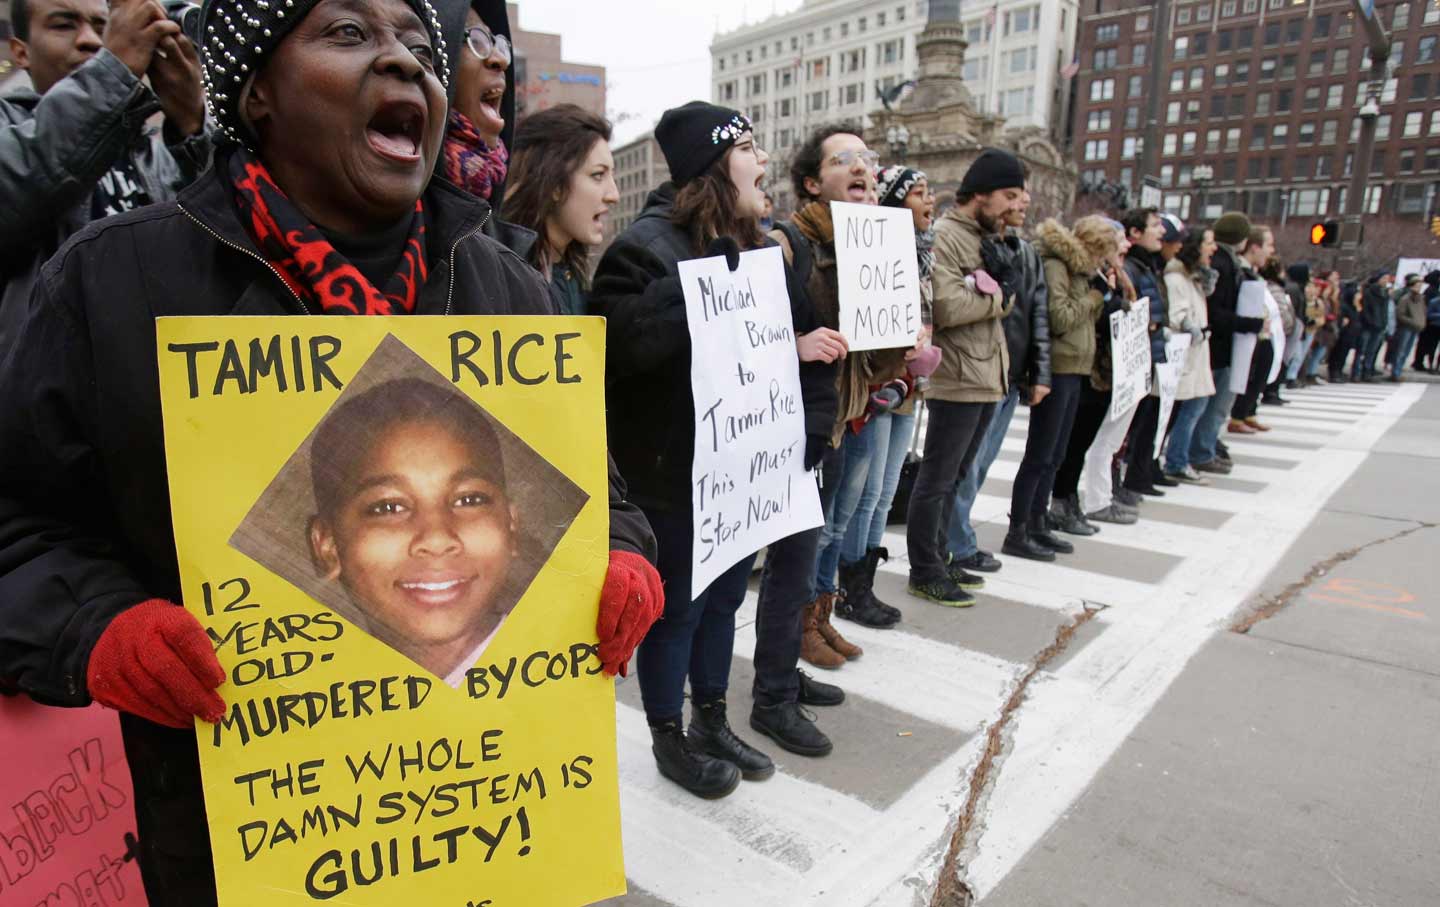 Why Video Evidence Wasn’t Enough to Get Justice for Tamir Rice